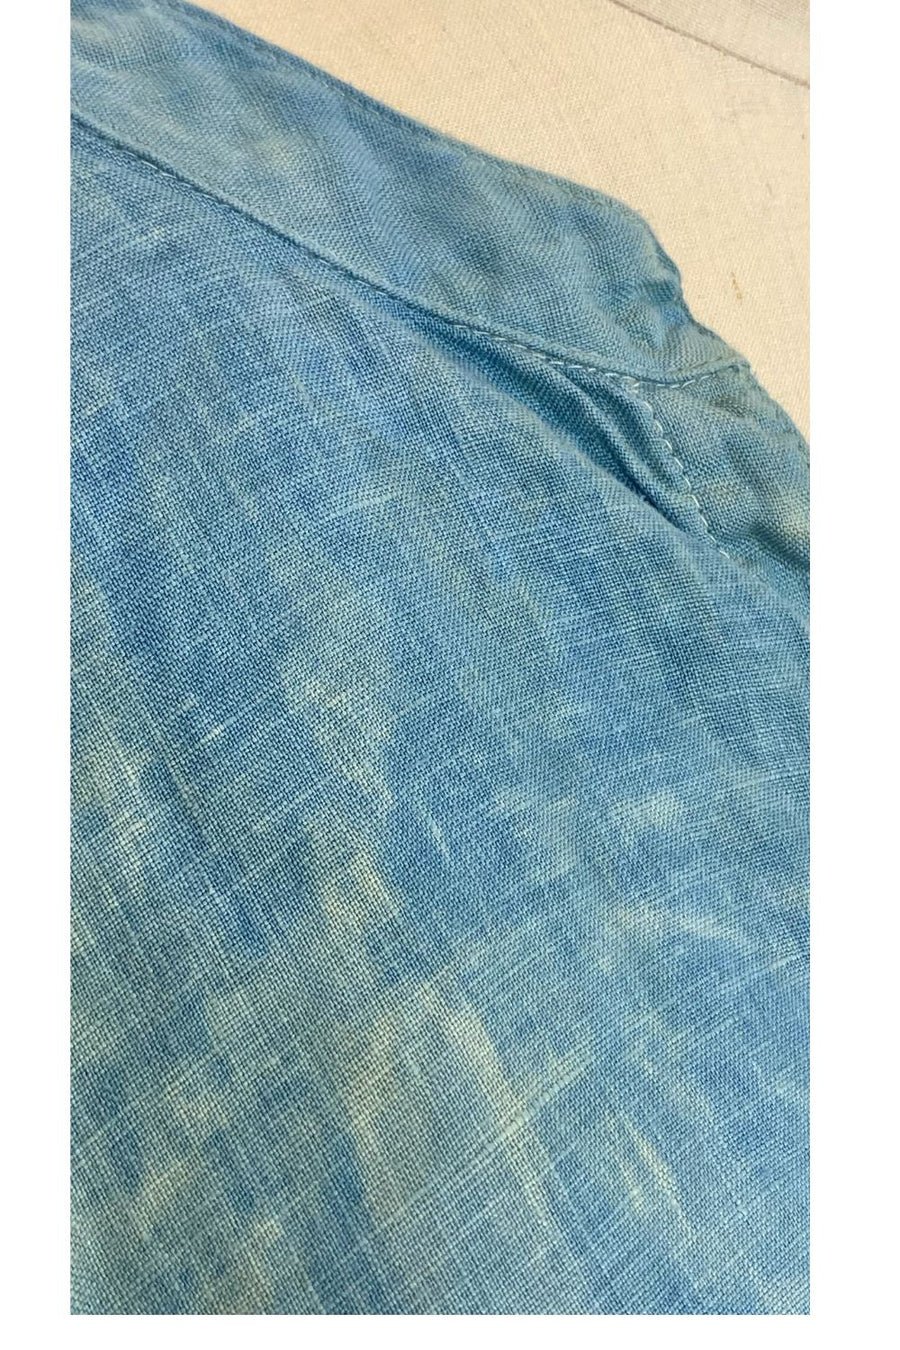 Botanically Dyed Linen Tunic in Blue Mist